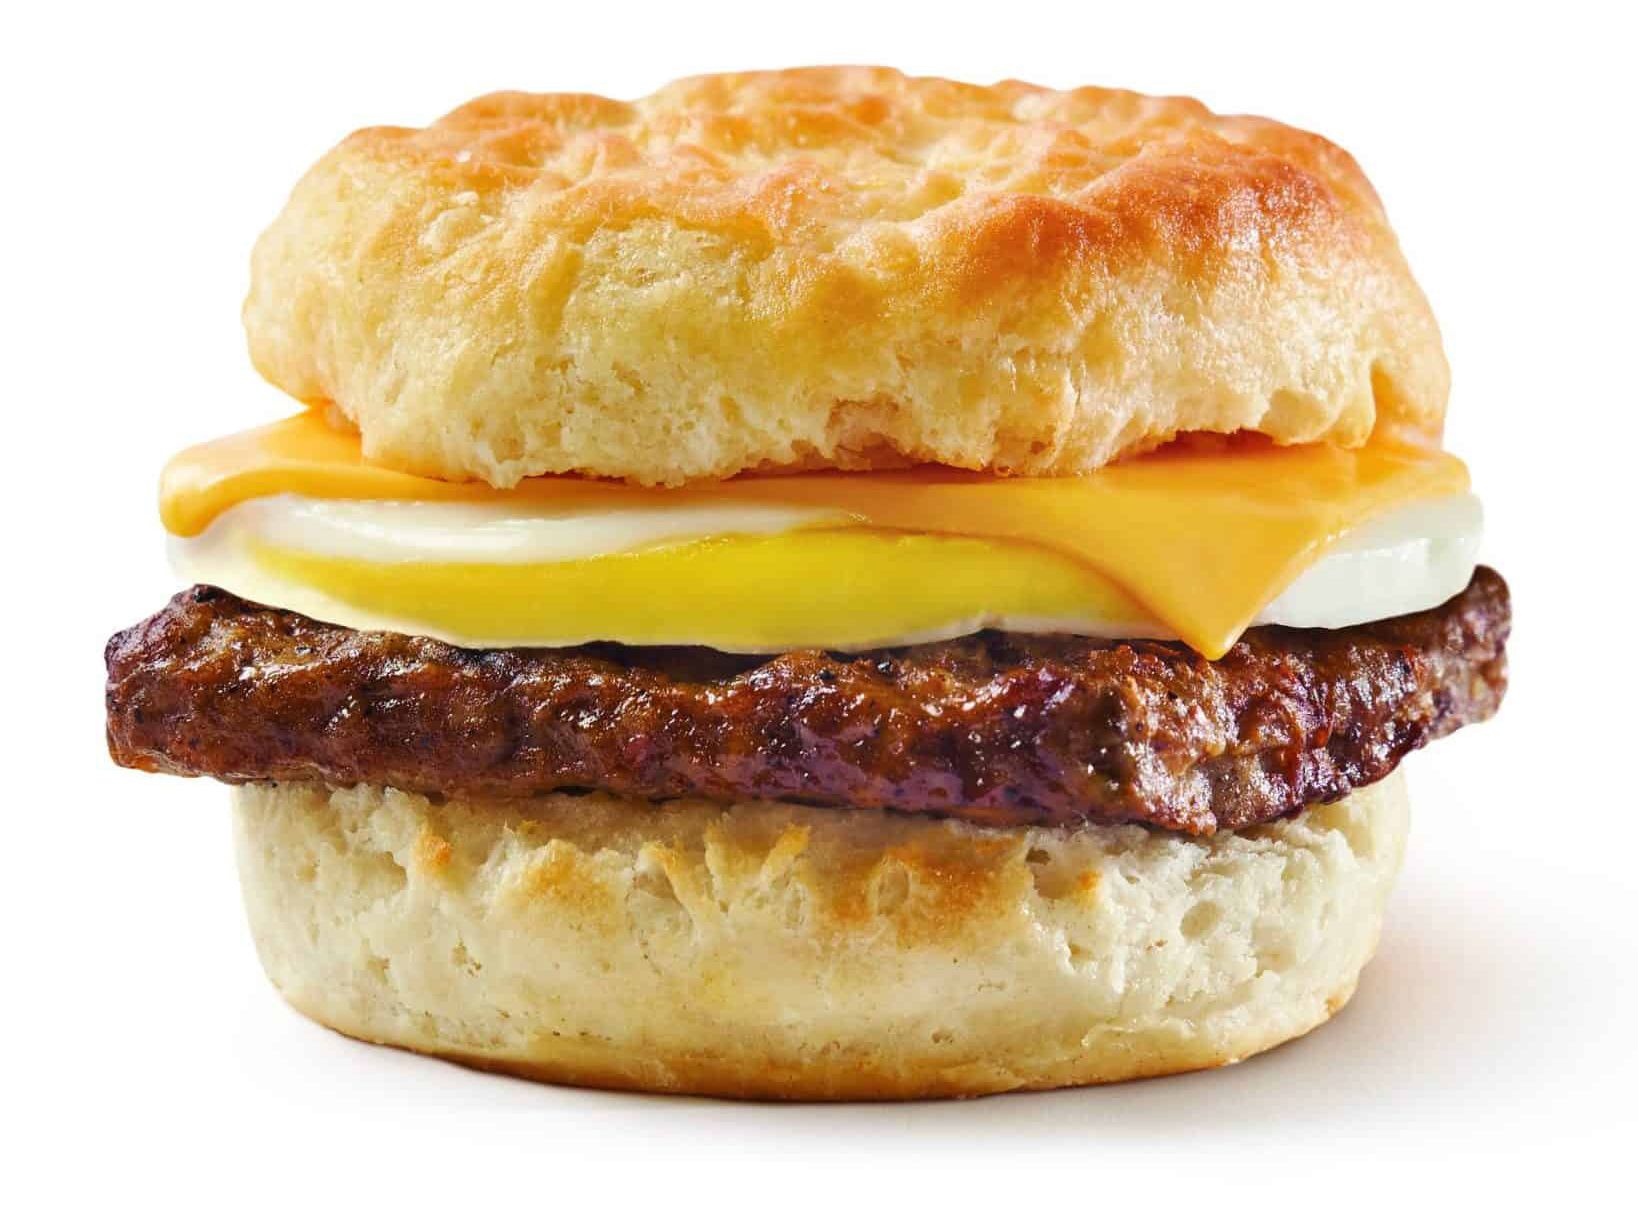 This November Get $1 Breakfast Sandwiches at Wendy's Including the Sausage or Bacon, Egg & Cheese Biscuit